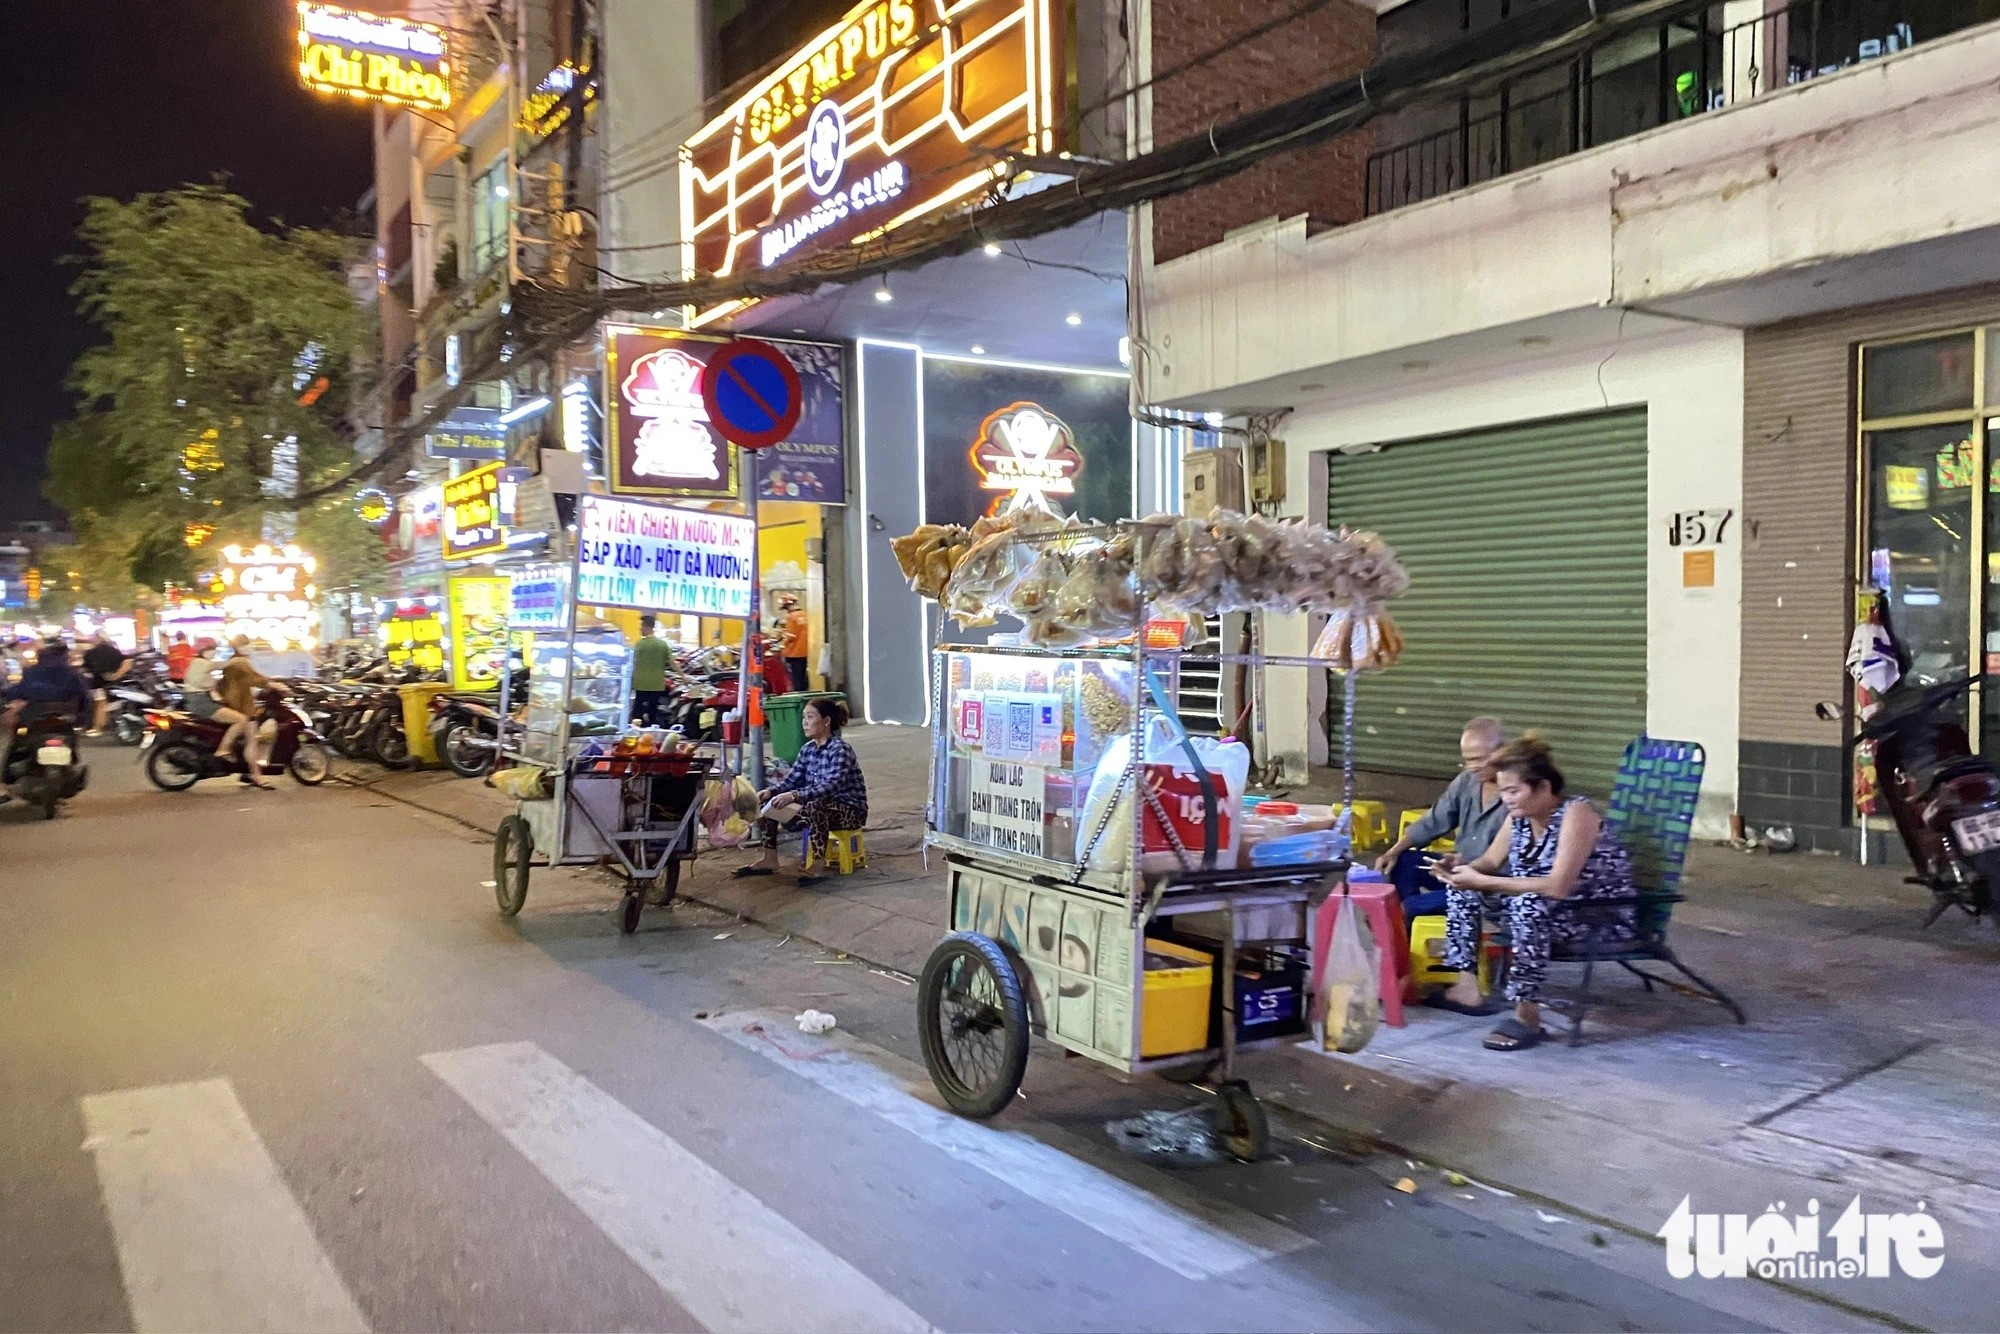 More than 80 food carts, offering a wide selection of snacks and drinks, encroach on the sidewalk and roadbed of Nguyen Gia Tri Street, located in Ward 25, Binh Thanh District, Ho Chi Minh City. Photo: Tien Quoc / Tuoi Tre